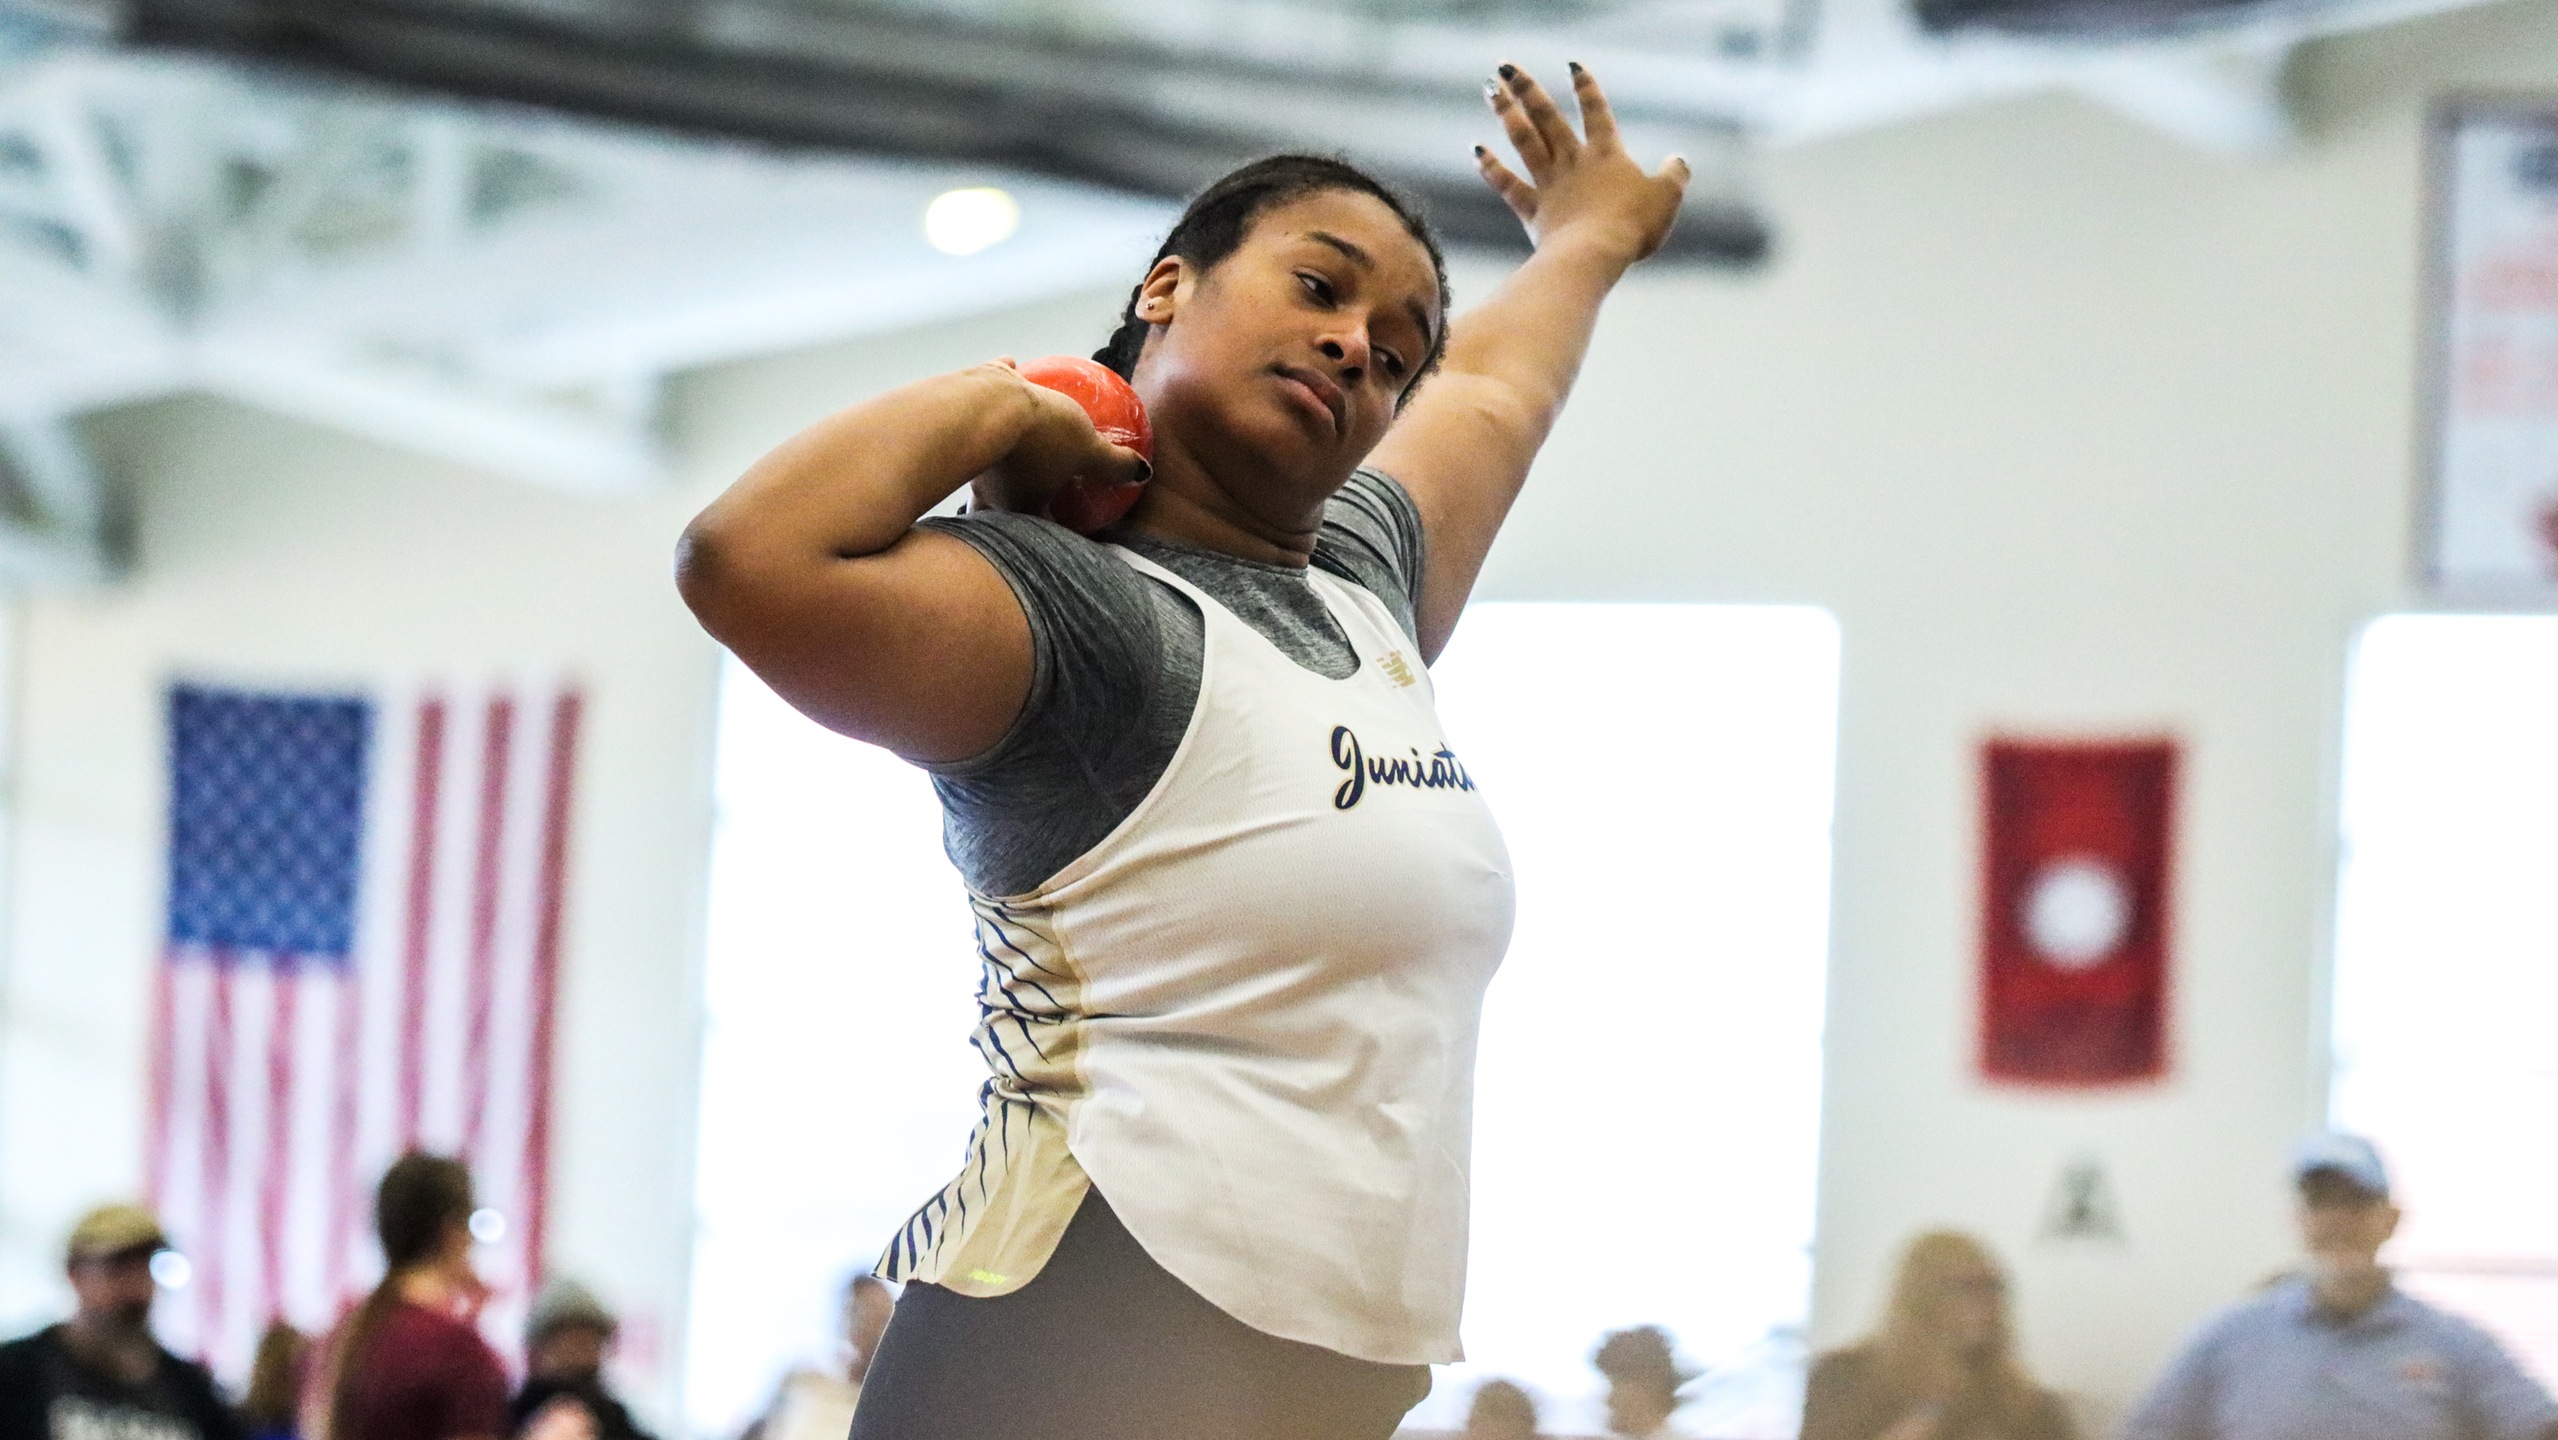 Women's Track and Field Tie for Sixth at Conference Champs: Correia Wins Shot Put, Breaks School Record